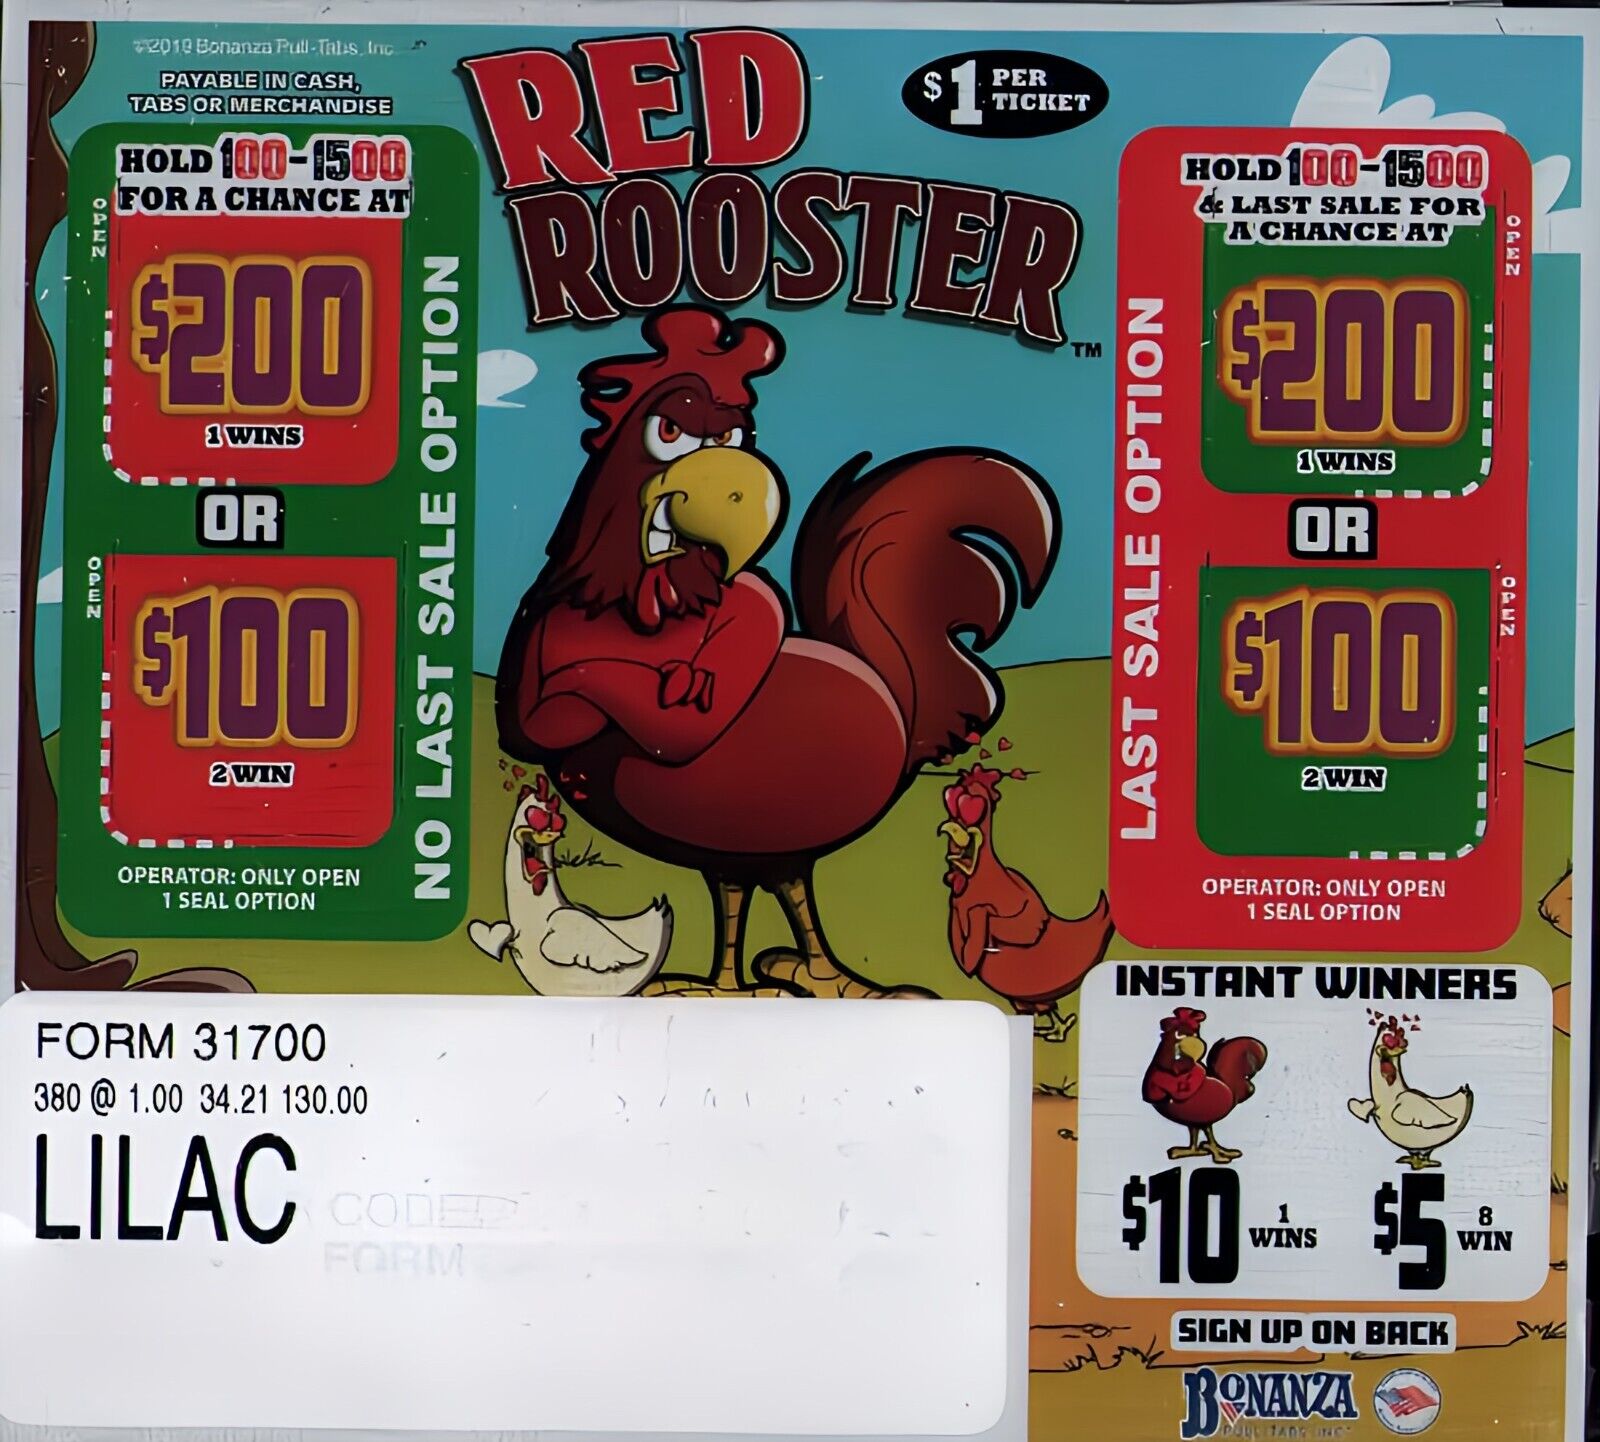 Hard Card Pull Tickets - 3 Pack Red Rooster